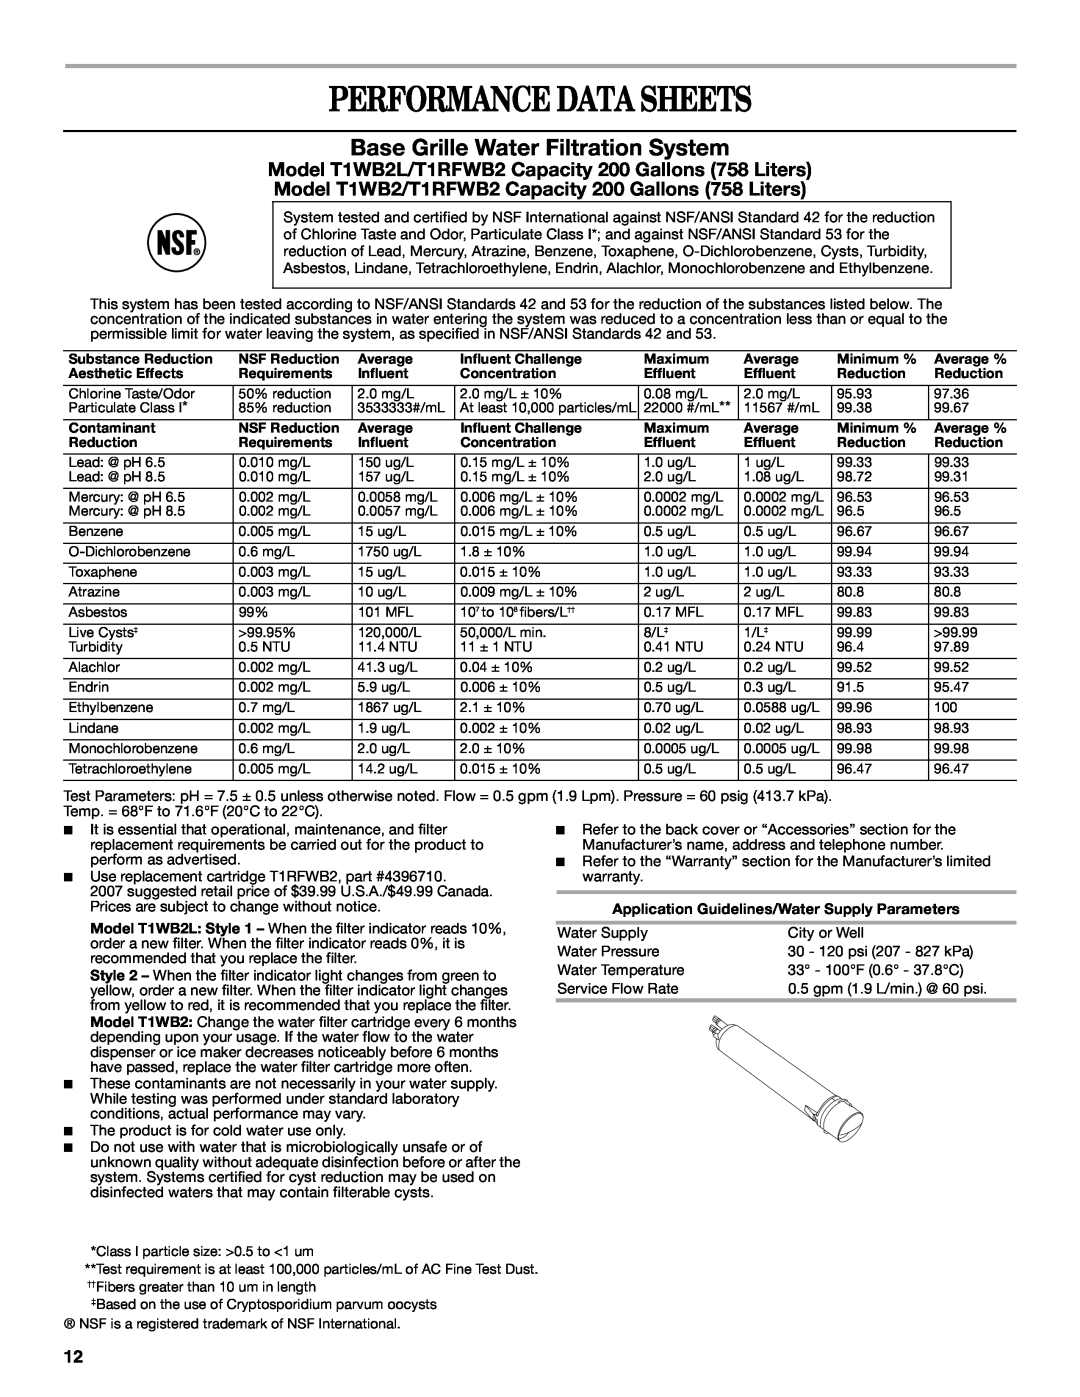 Whirlpool ES2FHAXSA00 warranty Performance Data Sheets, Base Grille Water Filtration System 